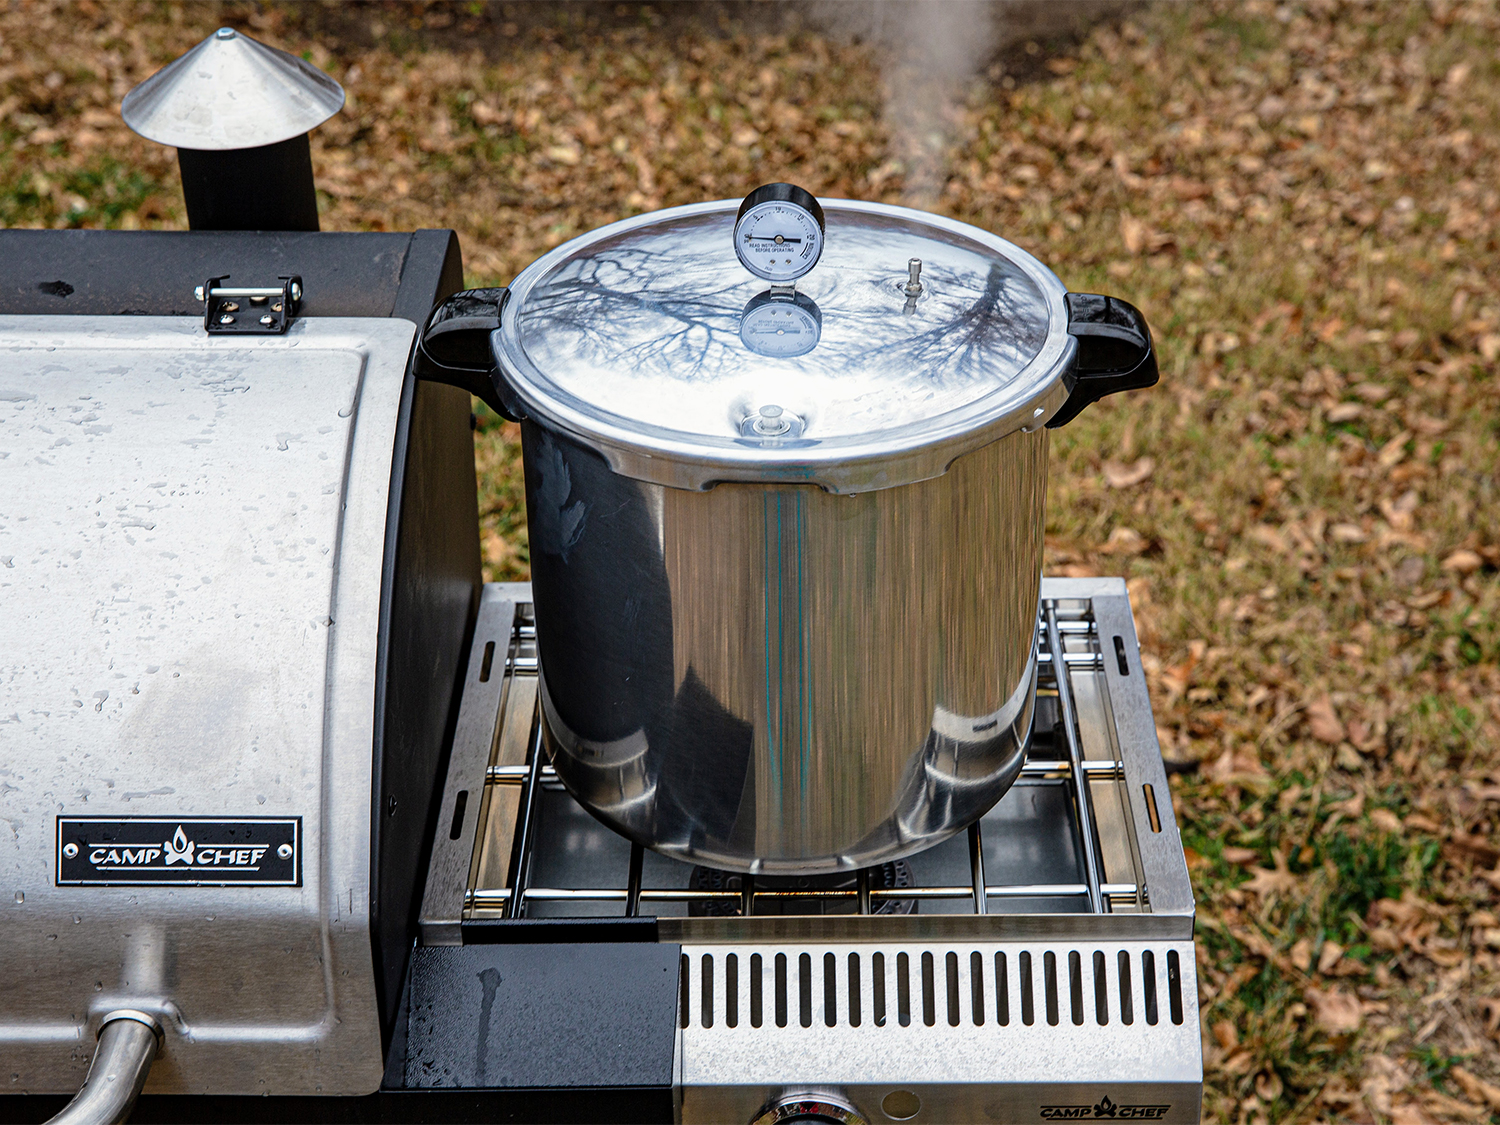 A pressure canner on the side of a camp chef grill.